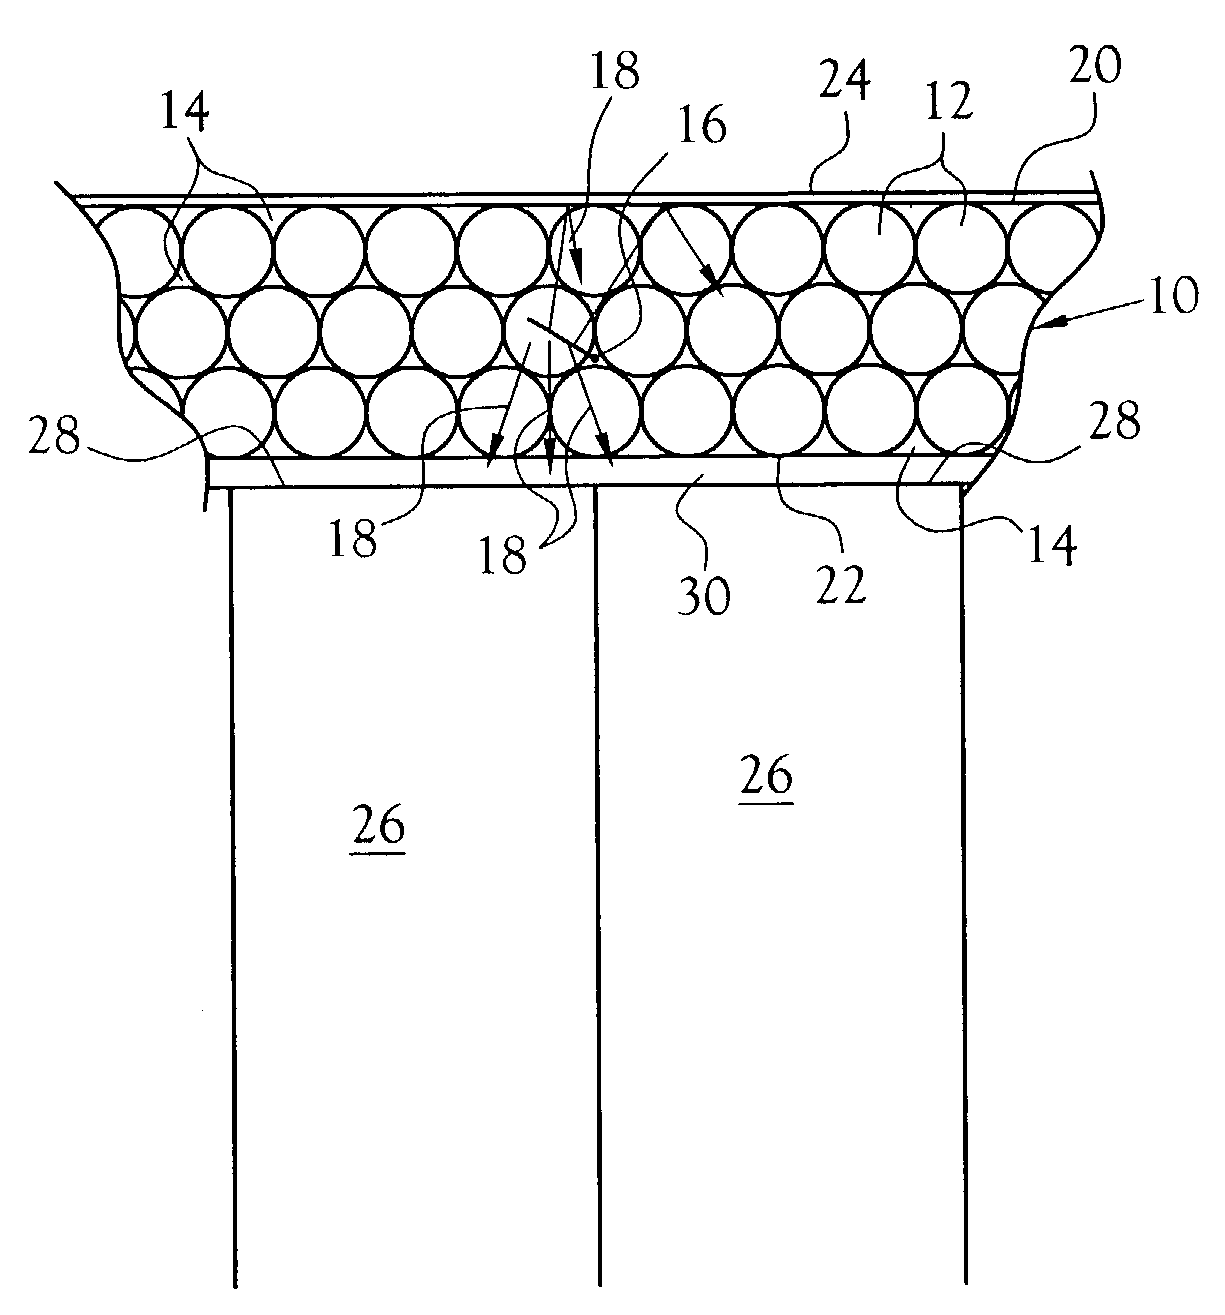 Neutron detector using lithiated glass-scintillating particle composite